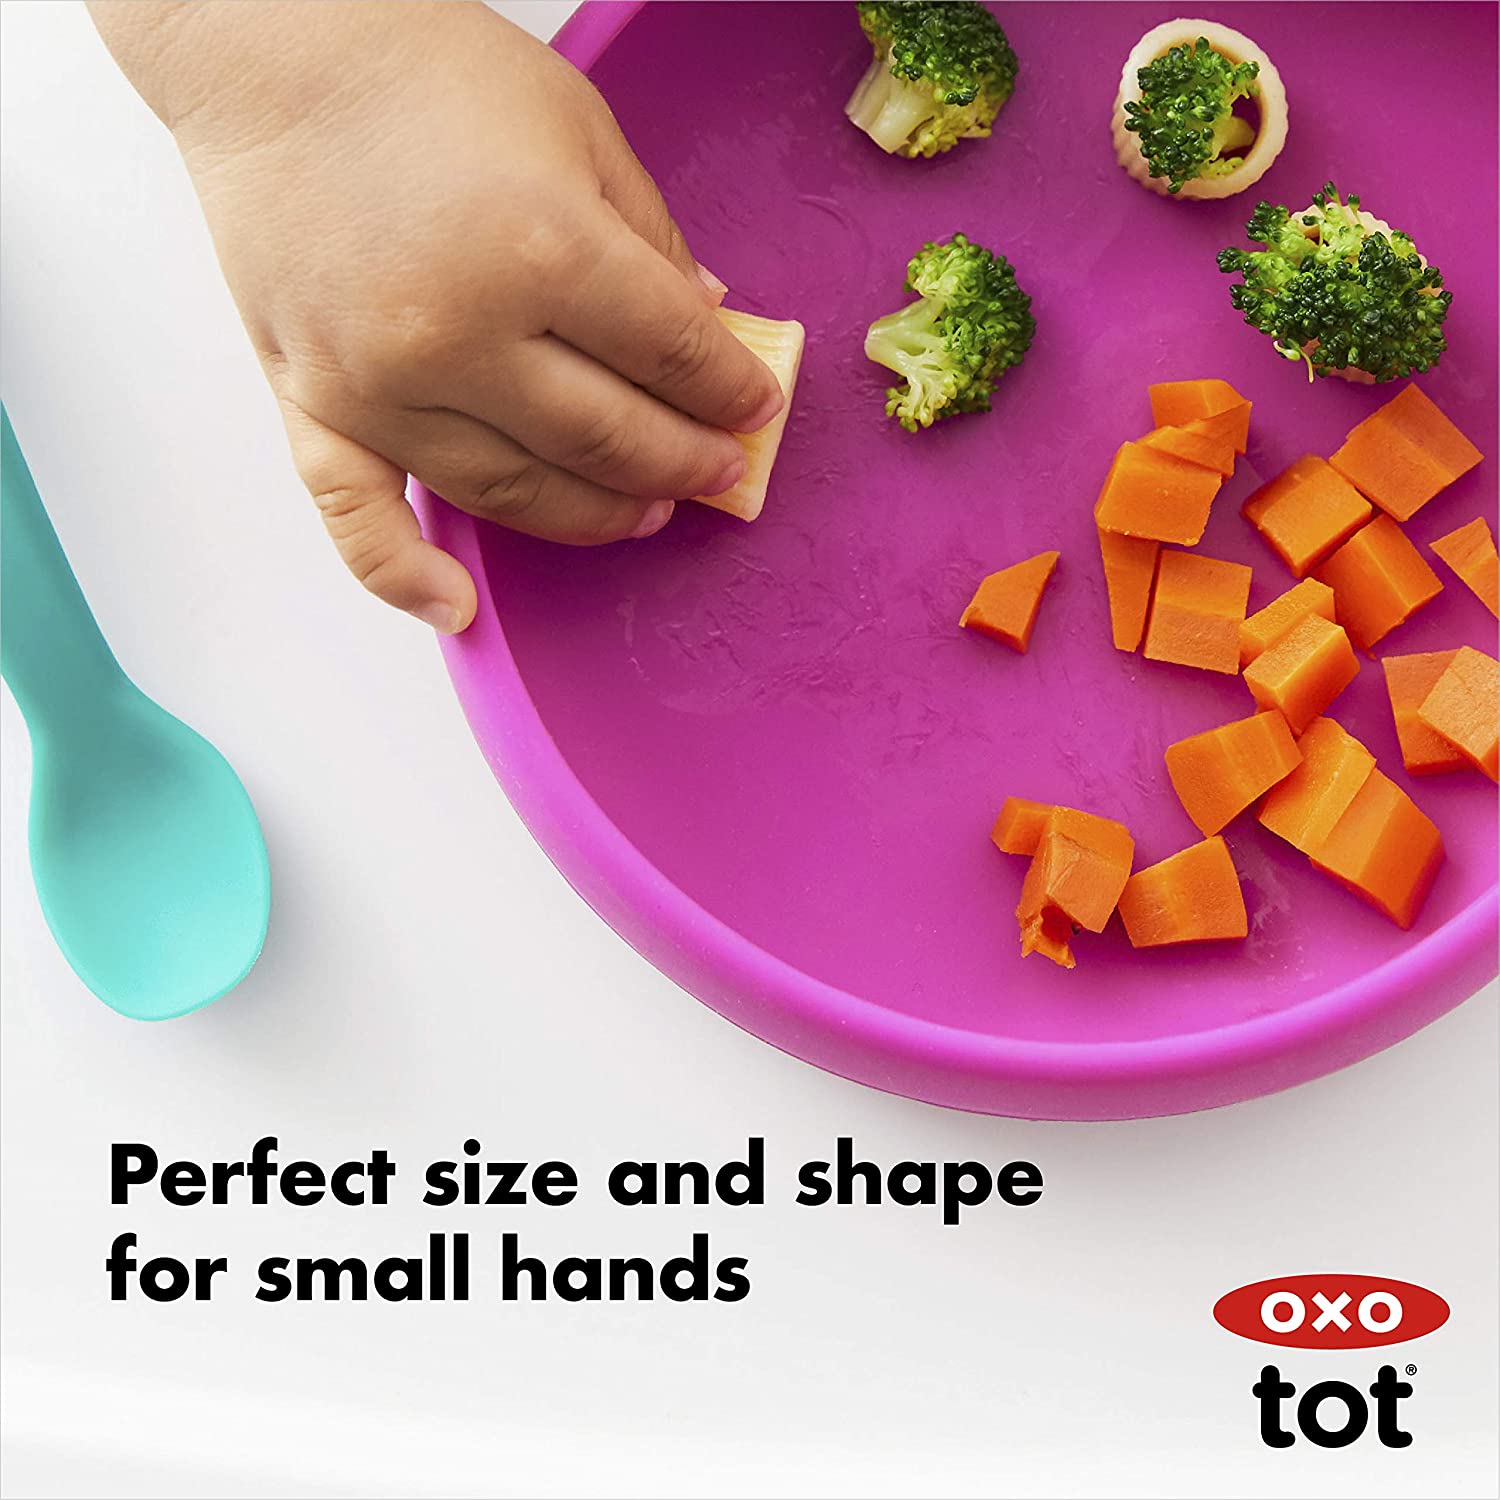 OXO TOT Silicone Plate, -- ANB Baby